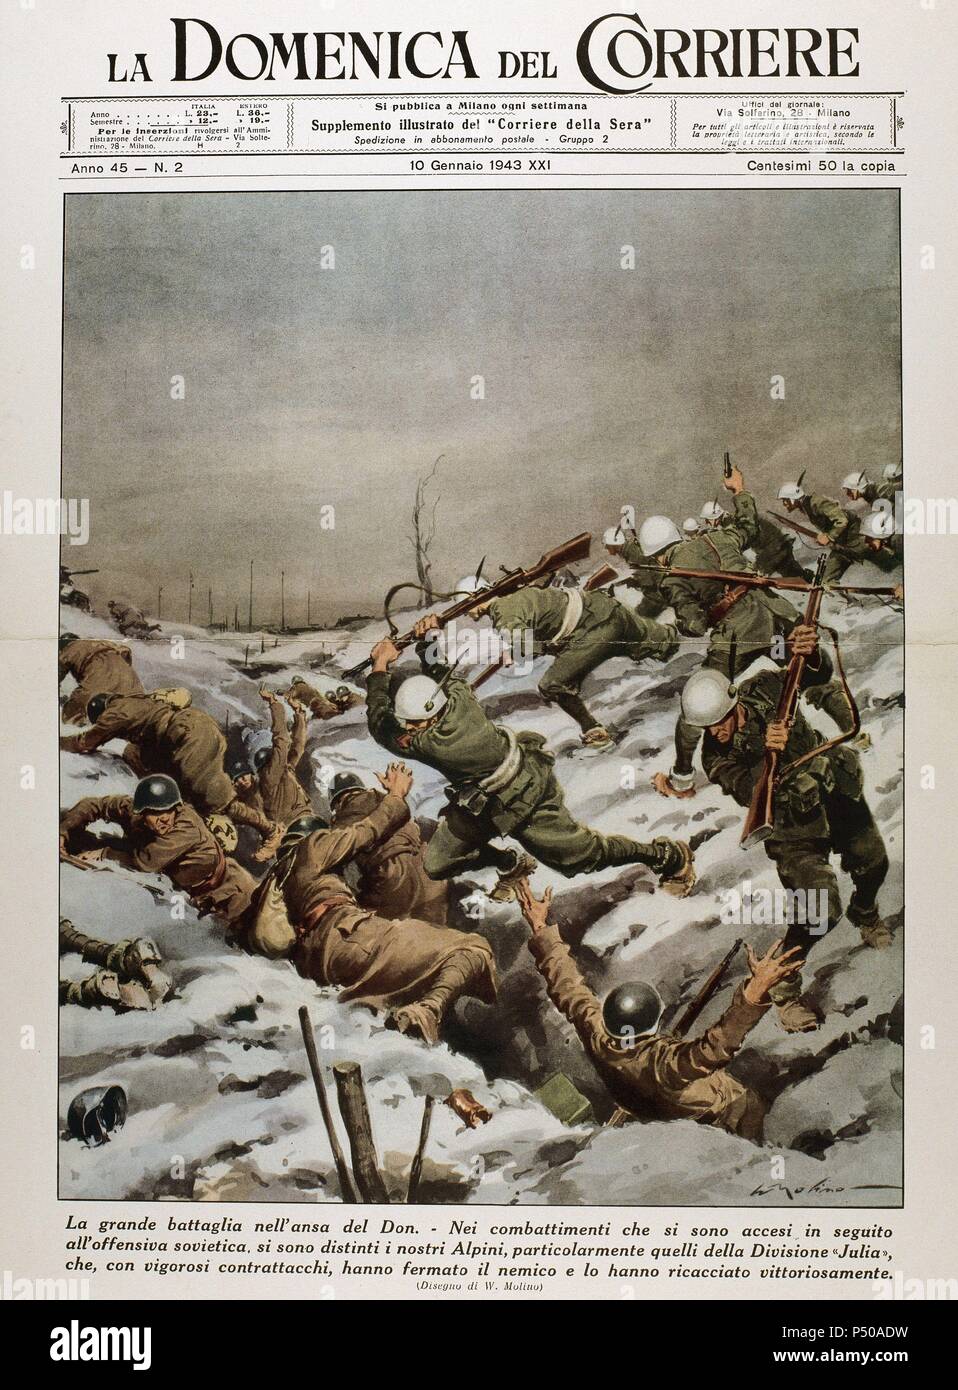 SECOND WORLD WAR. Battle of Stalingrad. River Don Front. Fighting between Russian and German troops.'La Domenica del Corriere'. Cover. 10 January 1943. Stock Photo